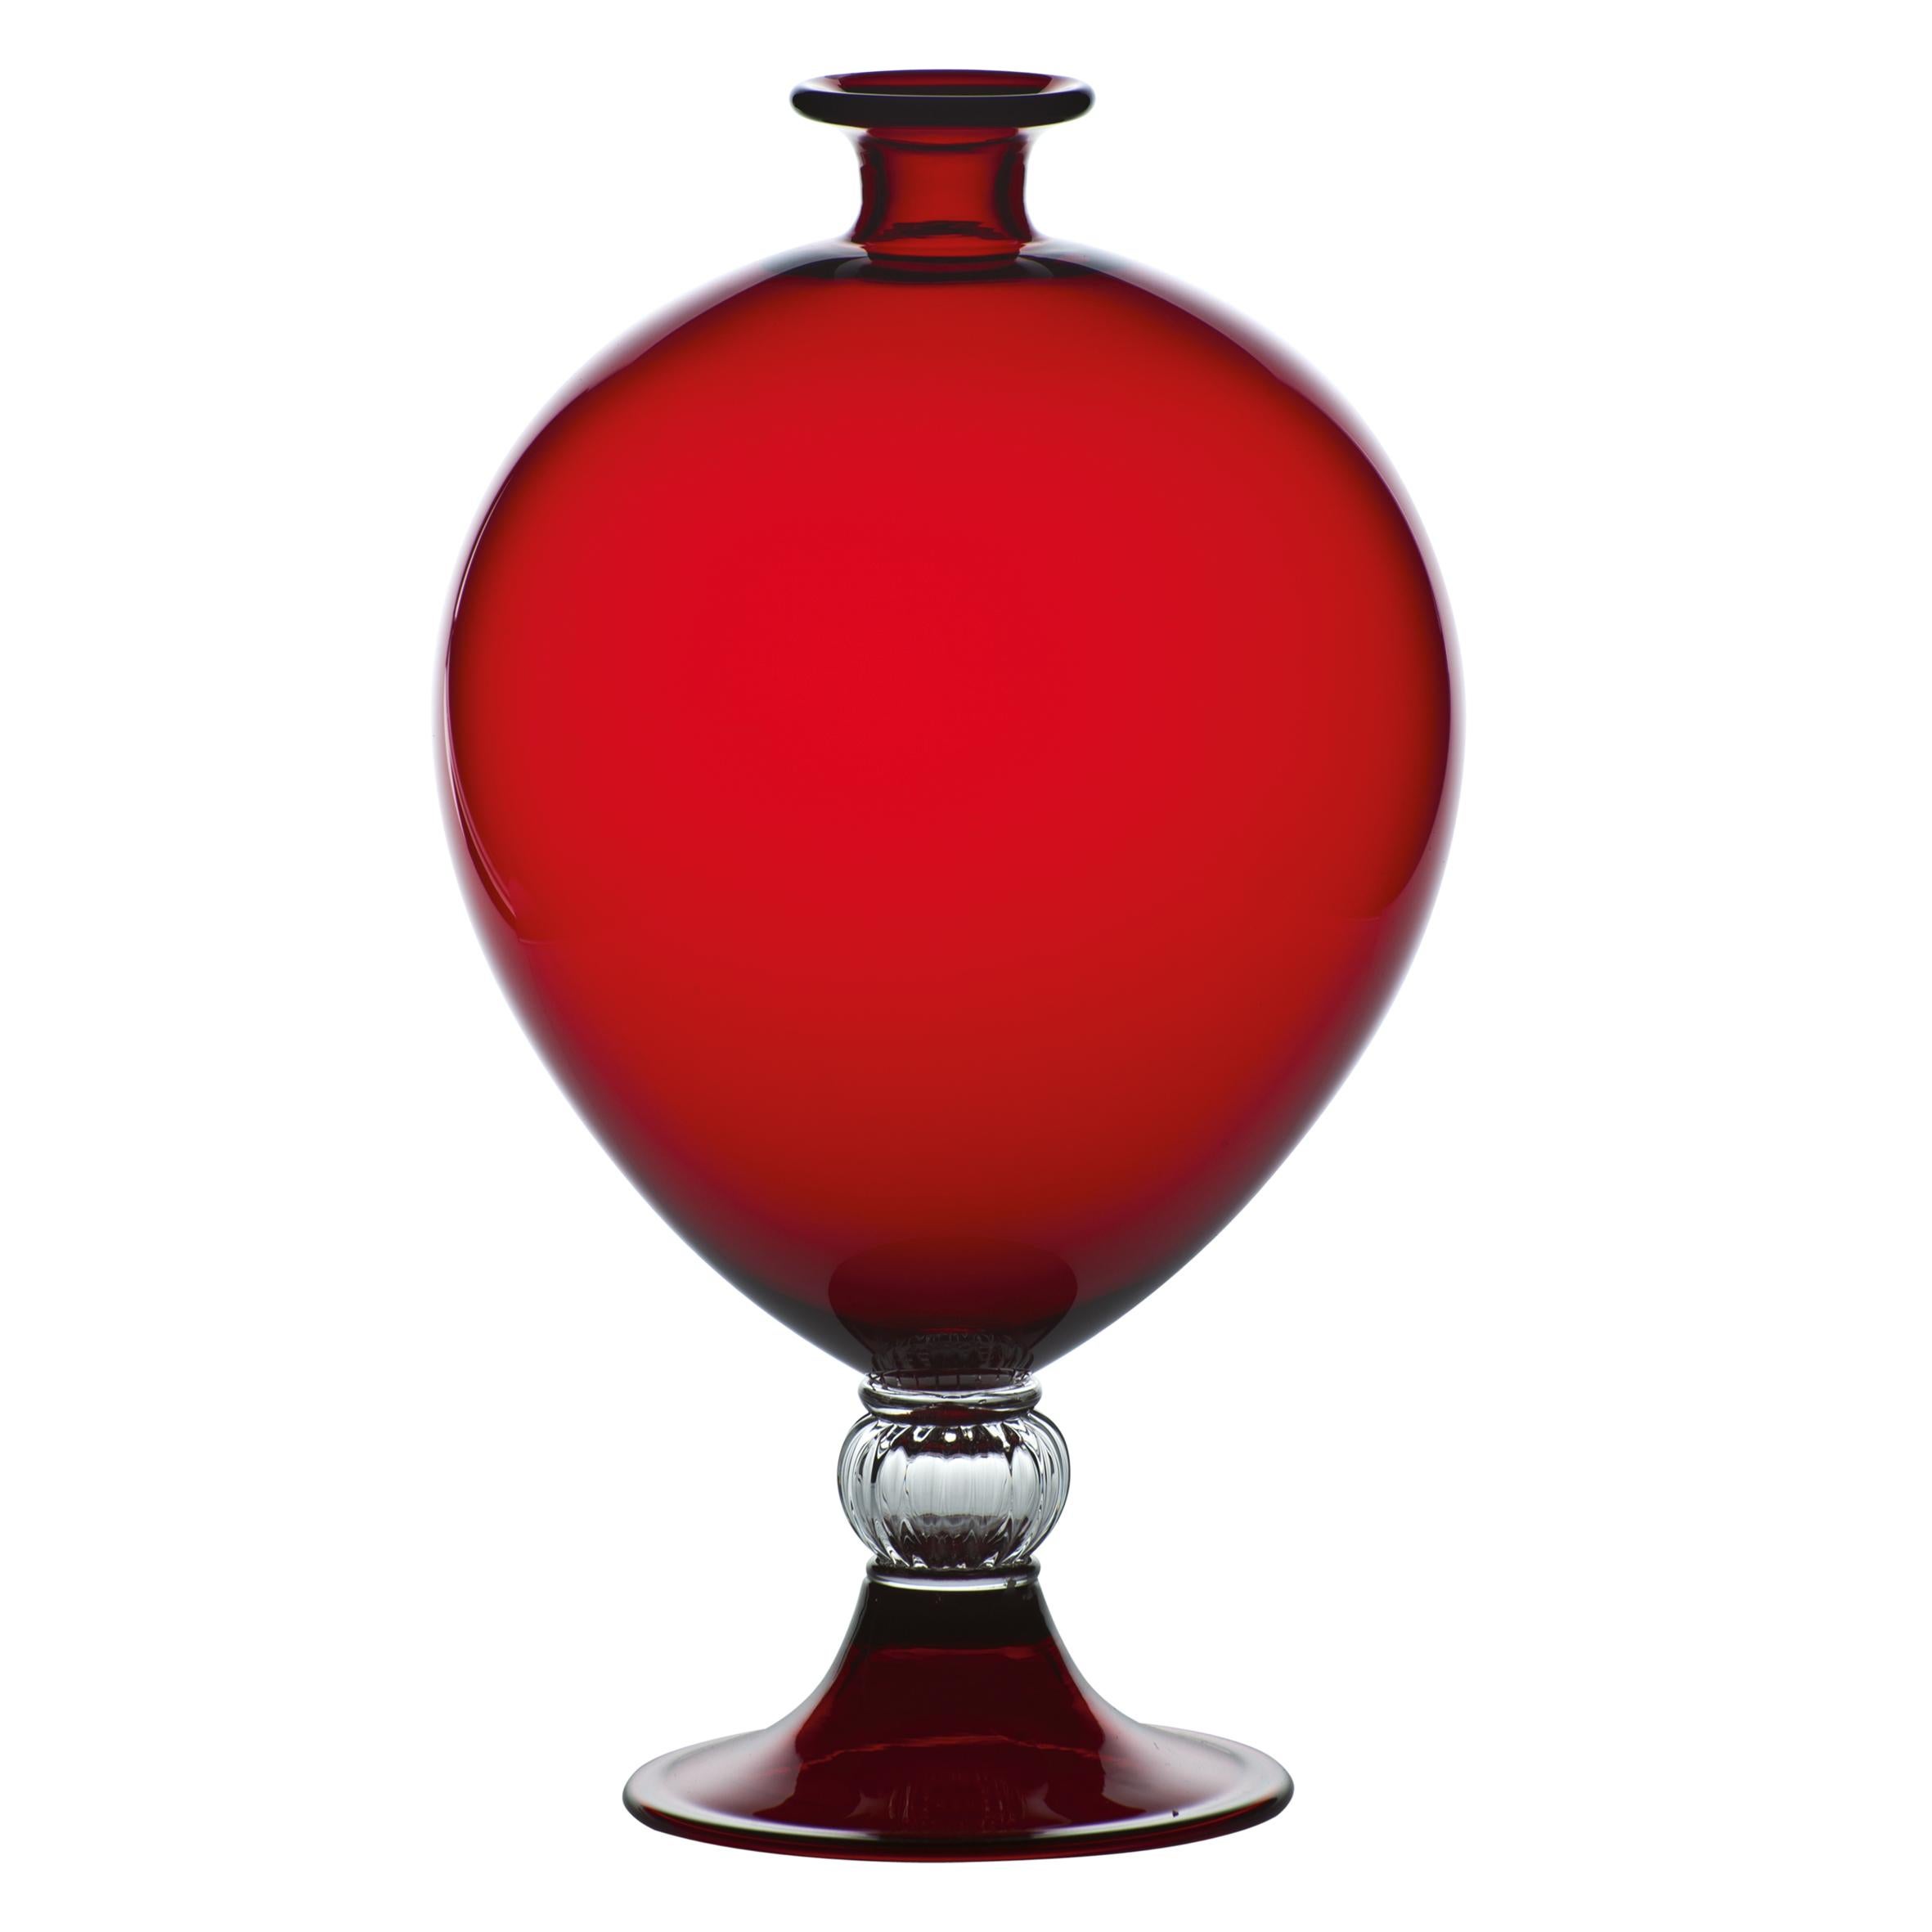 Venini glass vase with cylindrical body and crystal decorative base. Featured in red colored class with crystal designed in 1921. Perfect for indoor home decor as container or strong statement piece for any room.

Dimensions: 20 cm diameter x 32